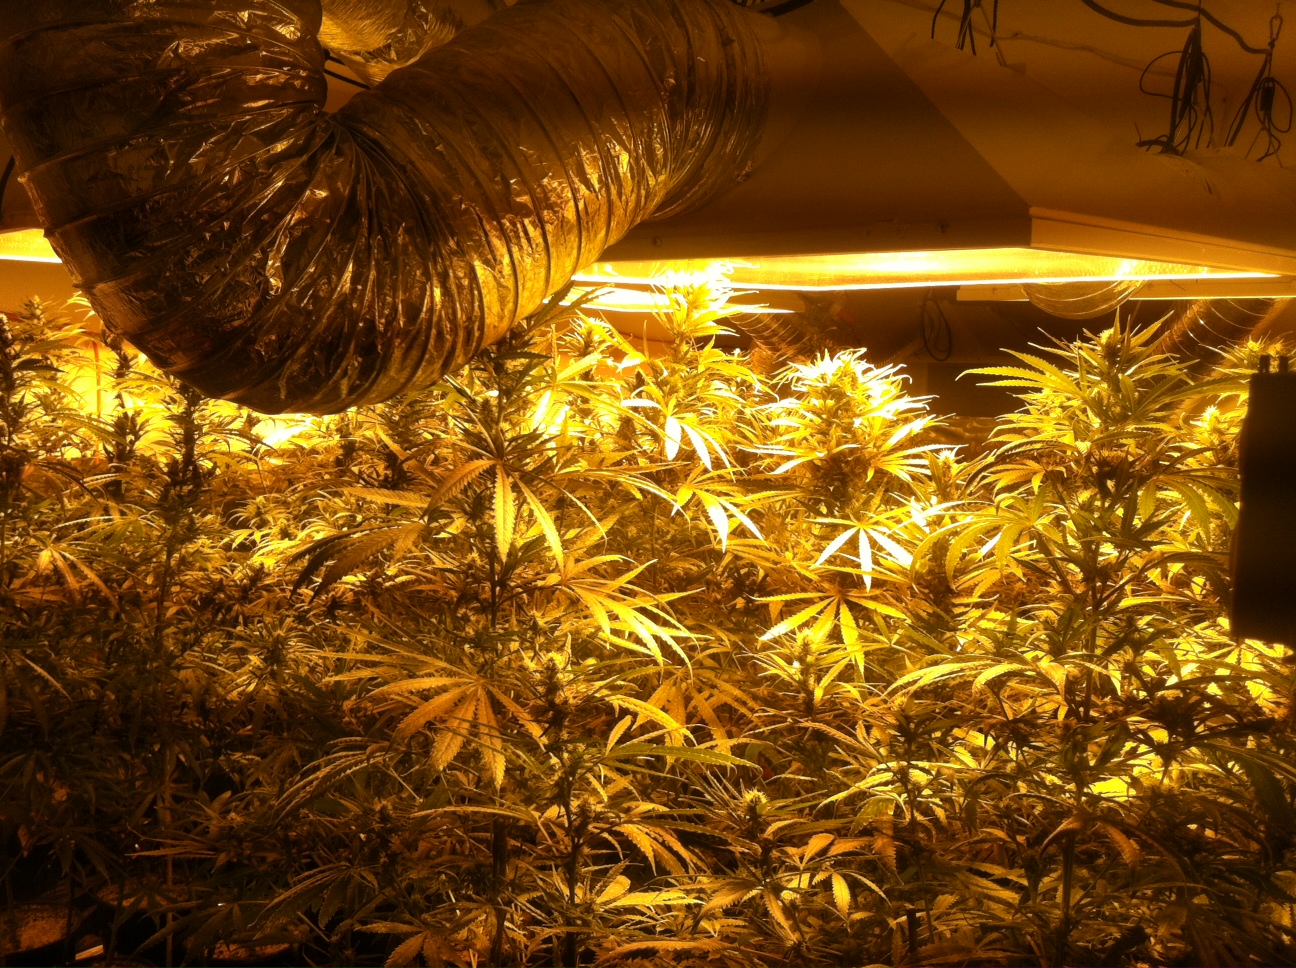 Marijuana plants in various stages of growth